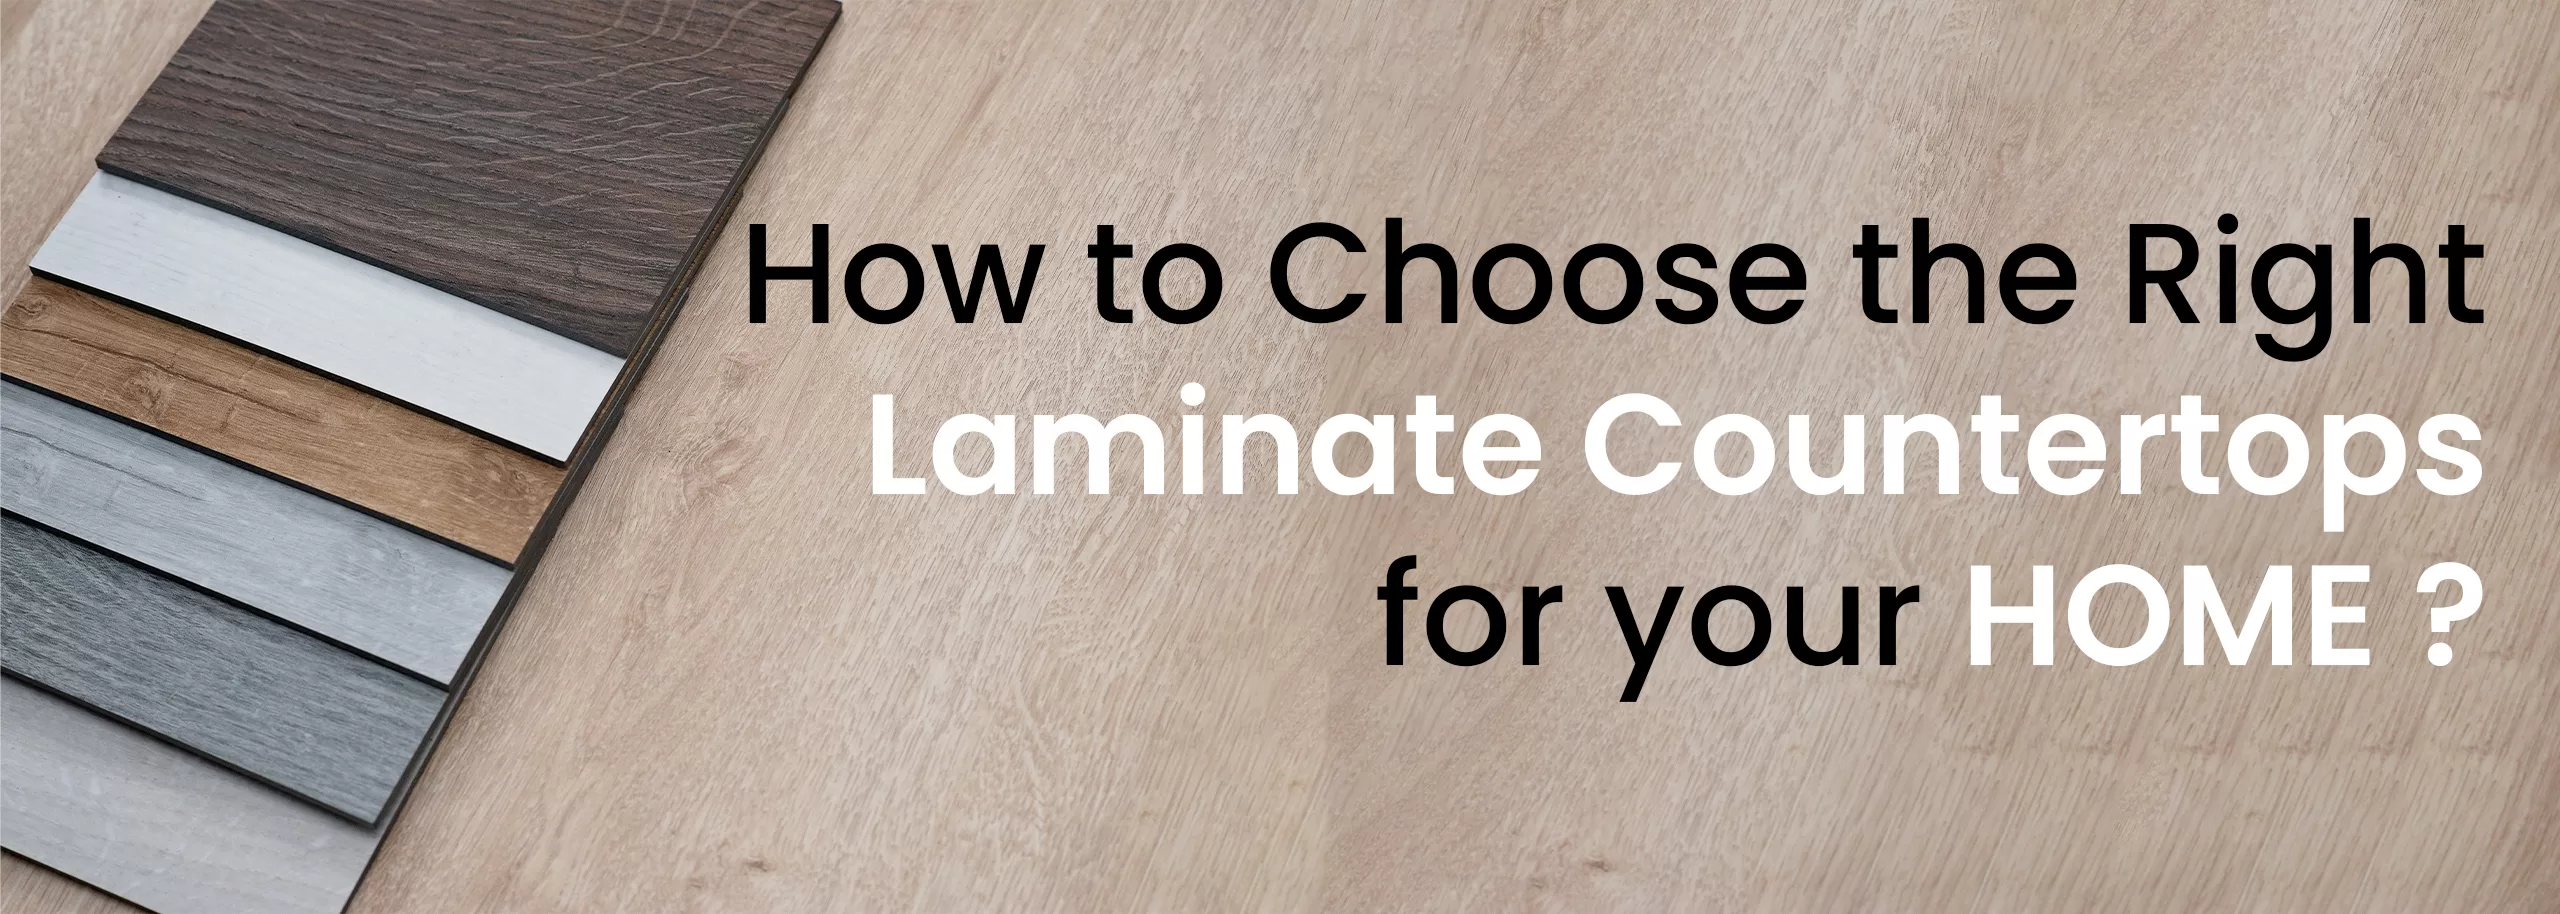 2. How To Choose The Right Laminate Countertops For Your Home  Jpg.webp